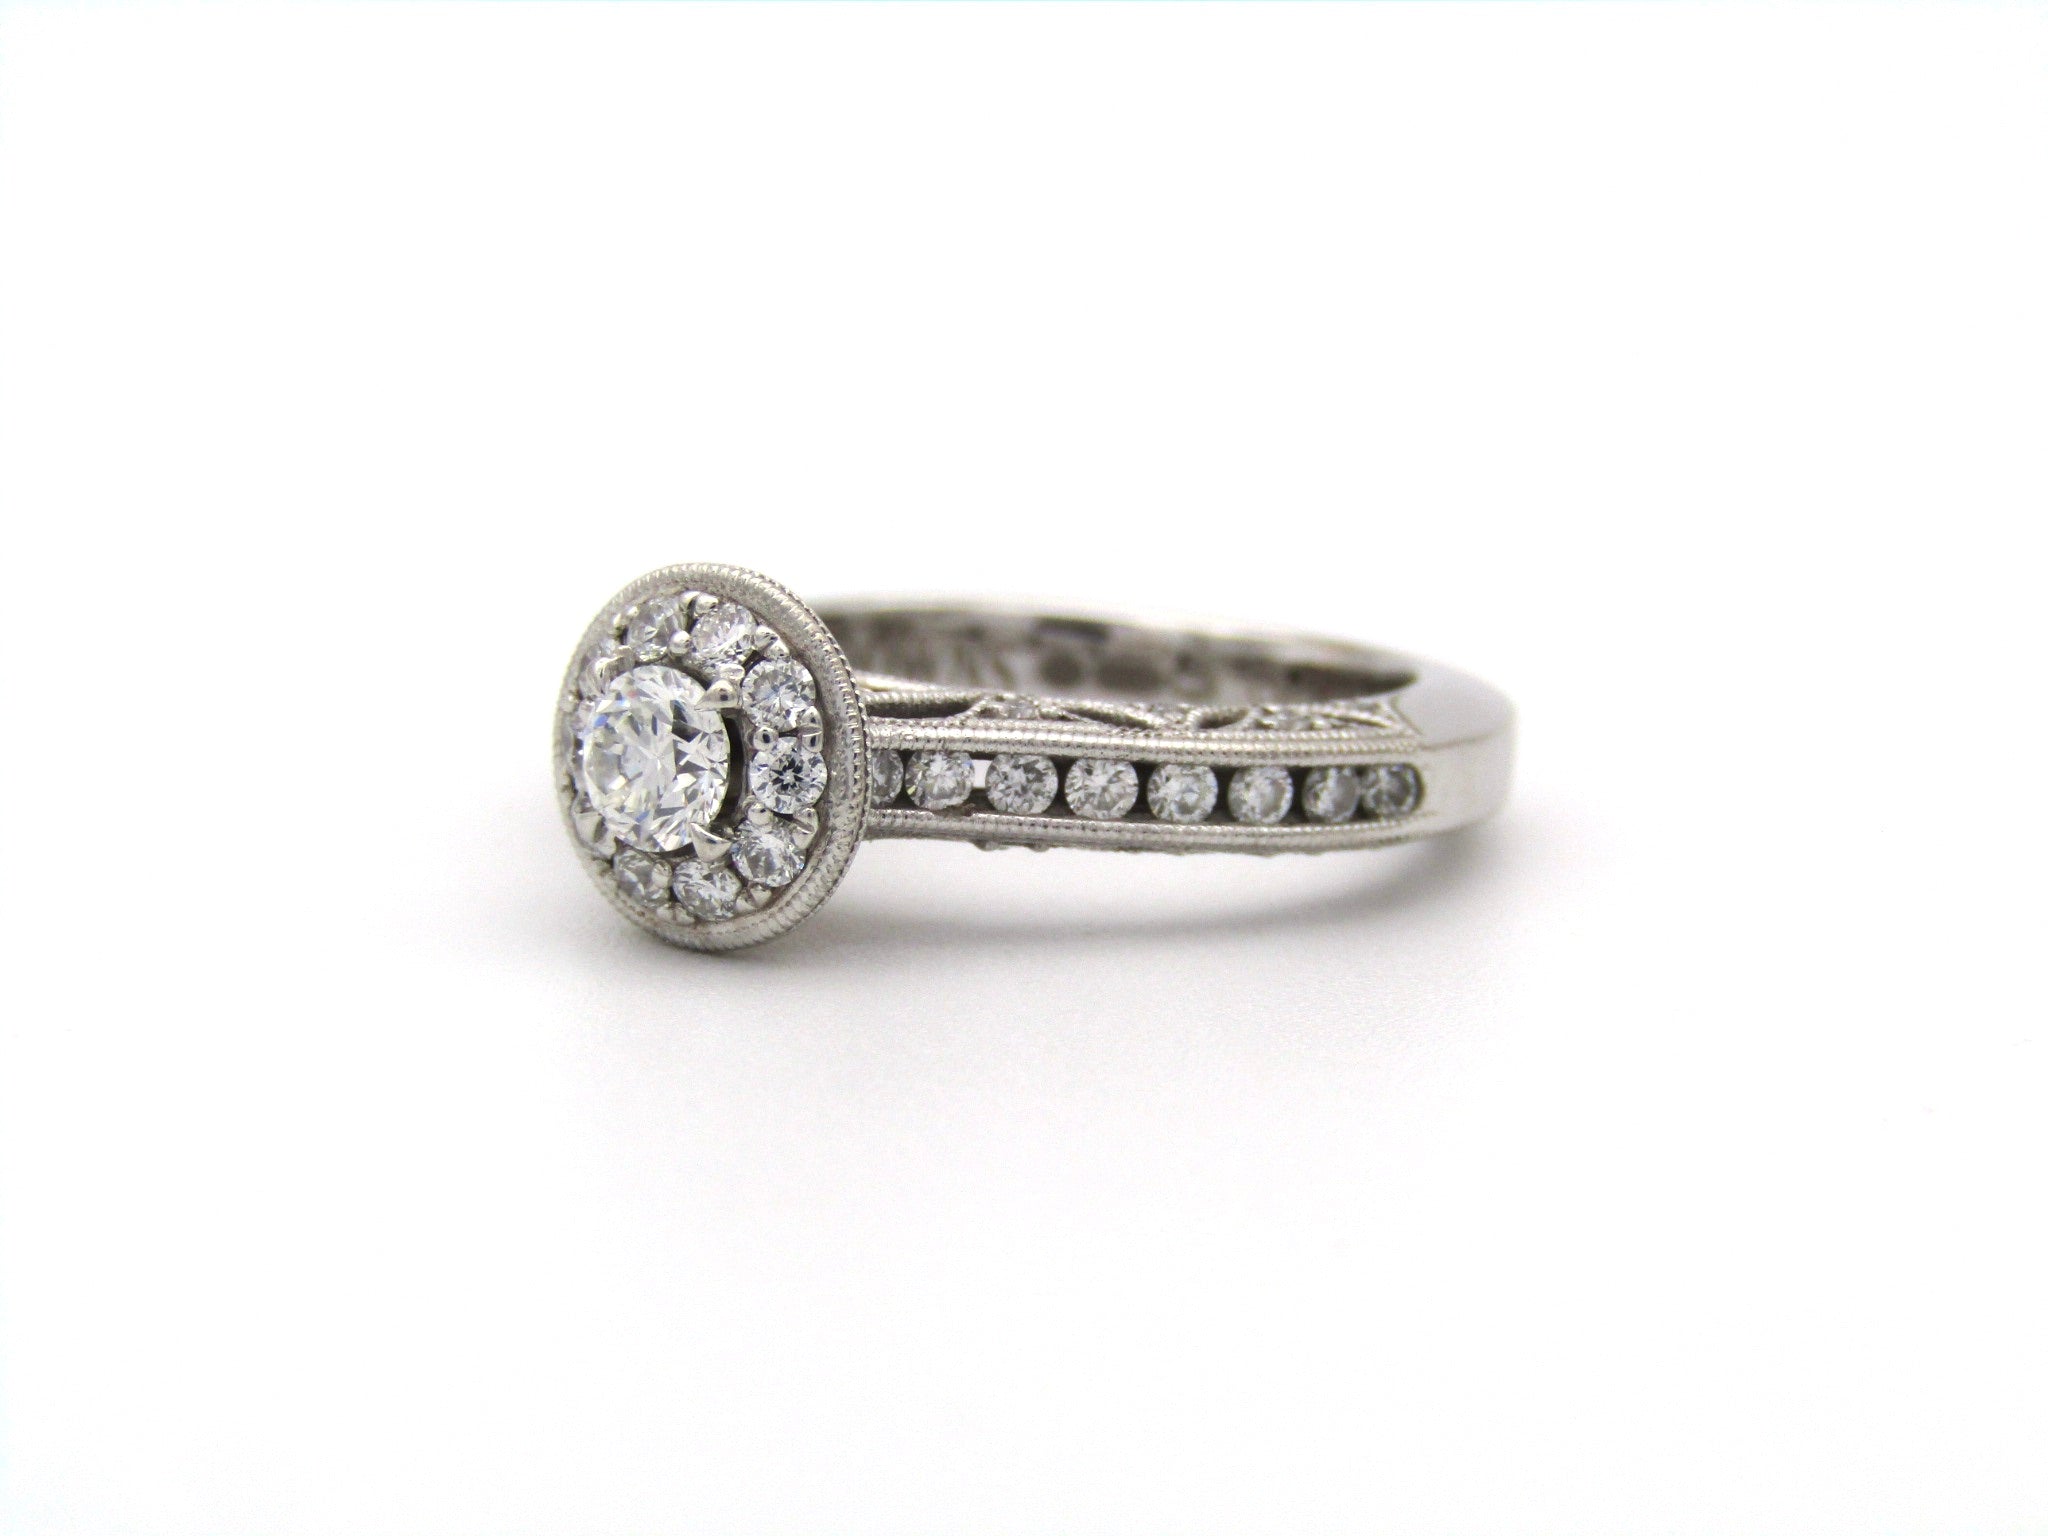 18K gold 1934 diamond engagement ring by Browns.